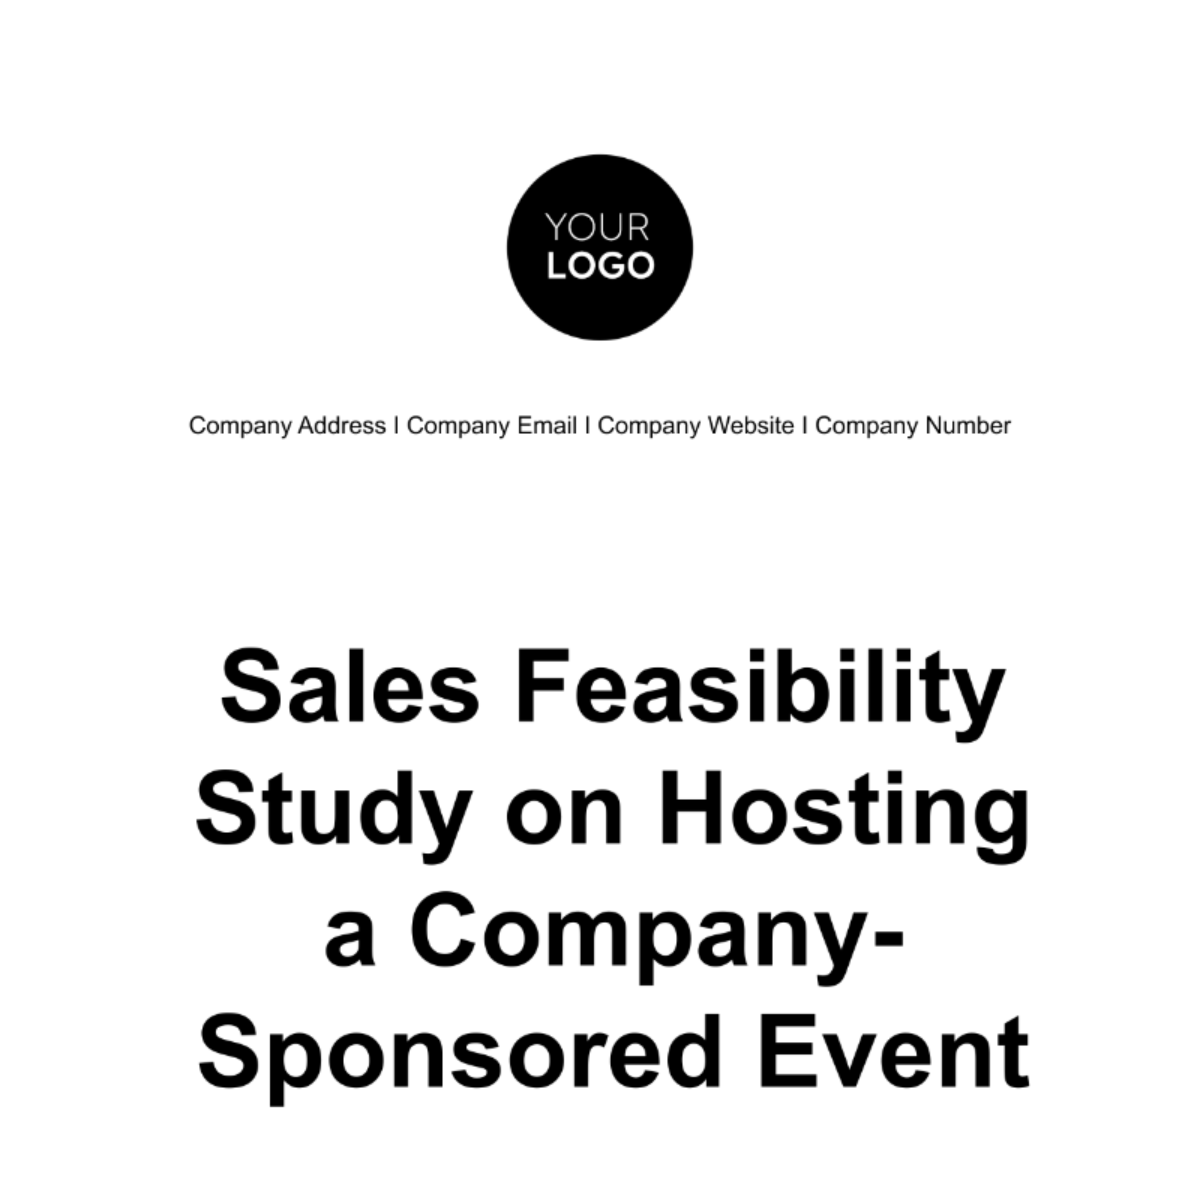 Free Sales Feasibility Study on Hosting a Company-Sponsored Event Template